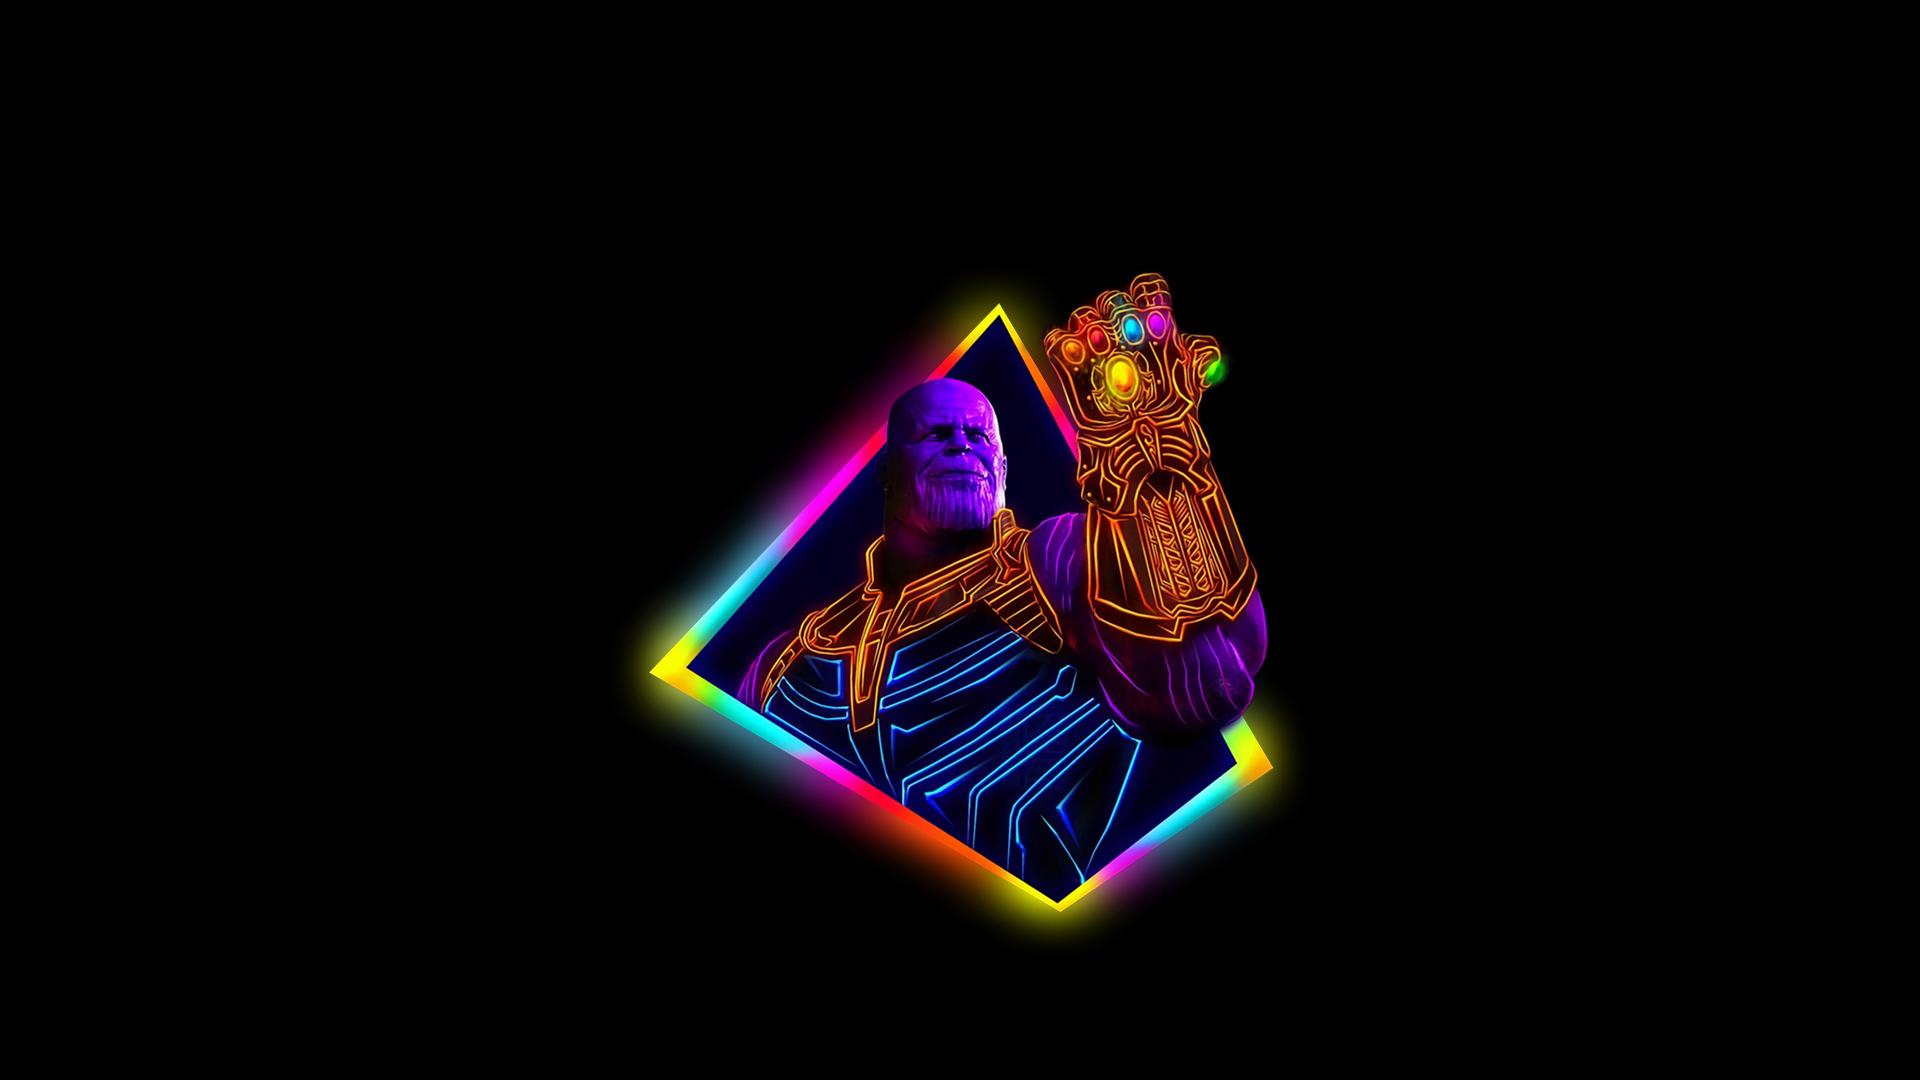 Thanos Avengers Infinity War 80s Outrun Art Wallpaper, HD Movies 4K Wallpaper, Image, Photo and Background